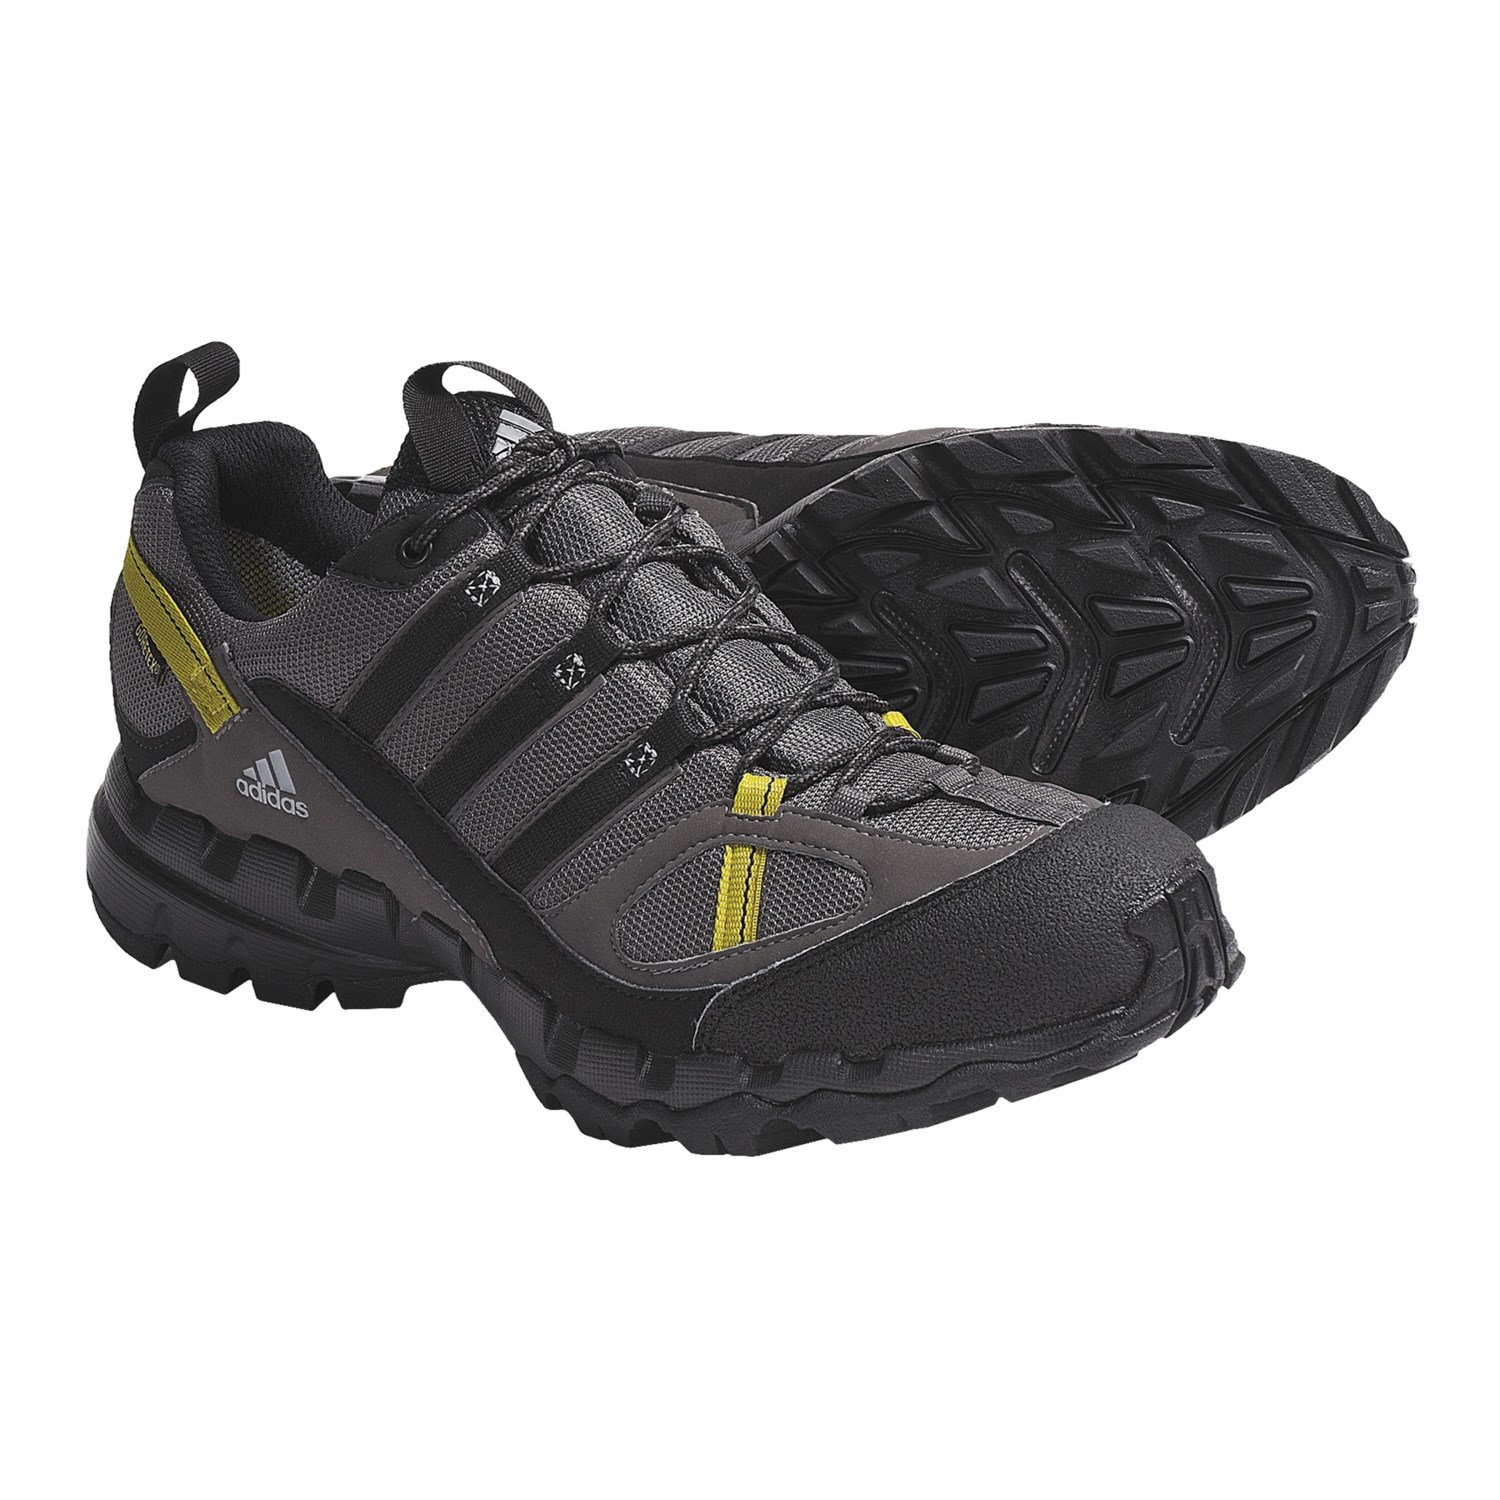 Adidas Outdoor AX 1 Gore-TexÂ® Trail Shoes - Waterproof (For Men) in ...